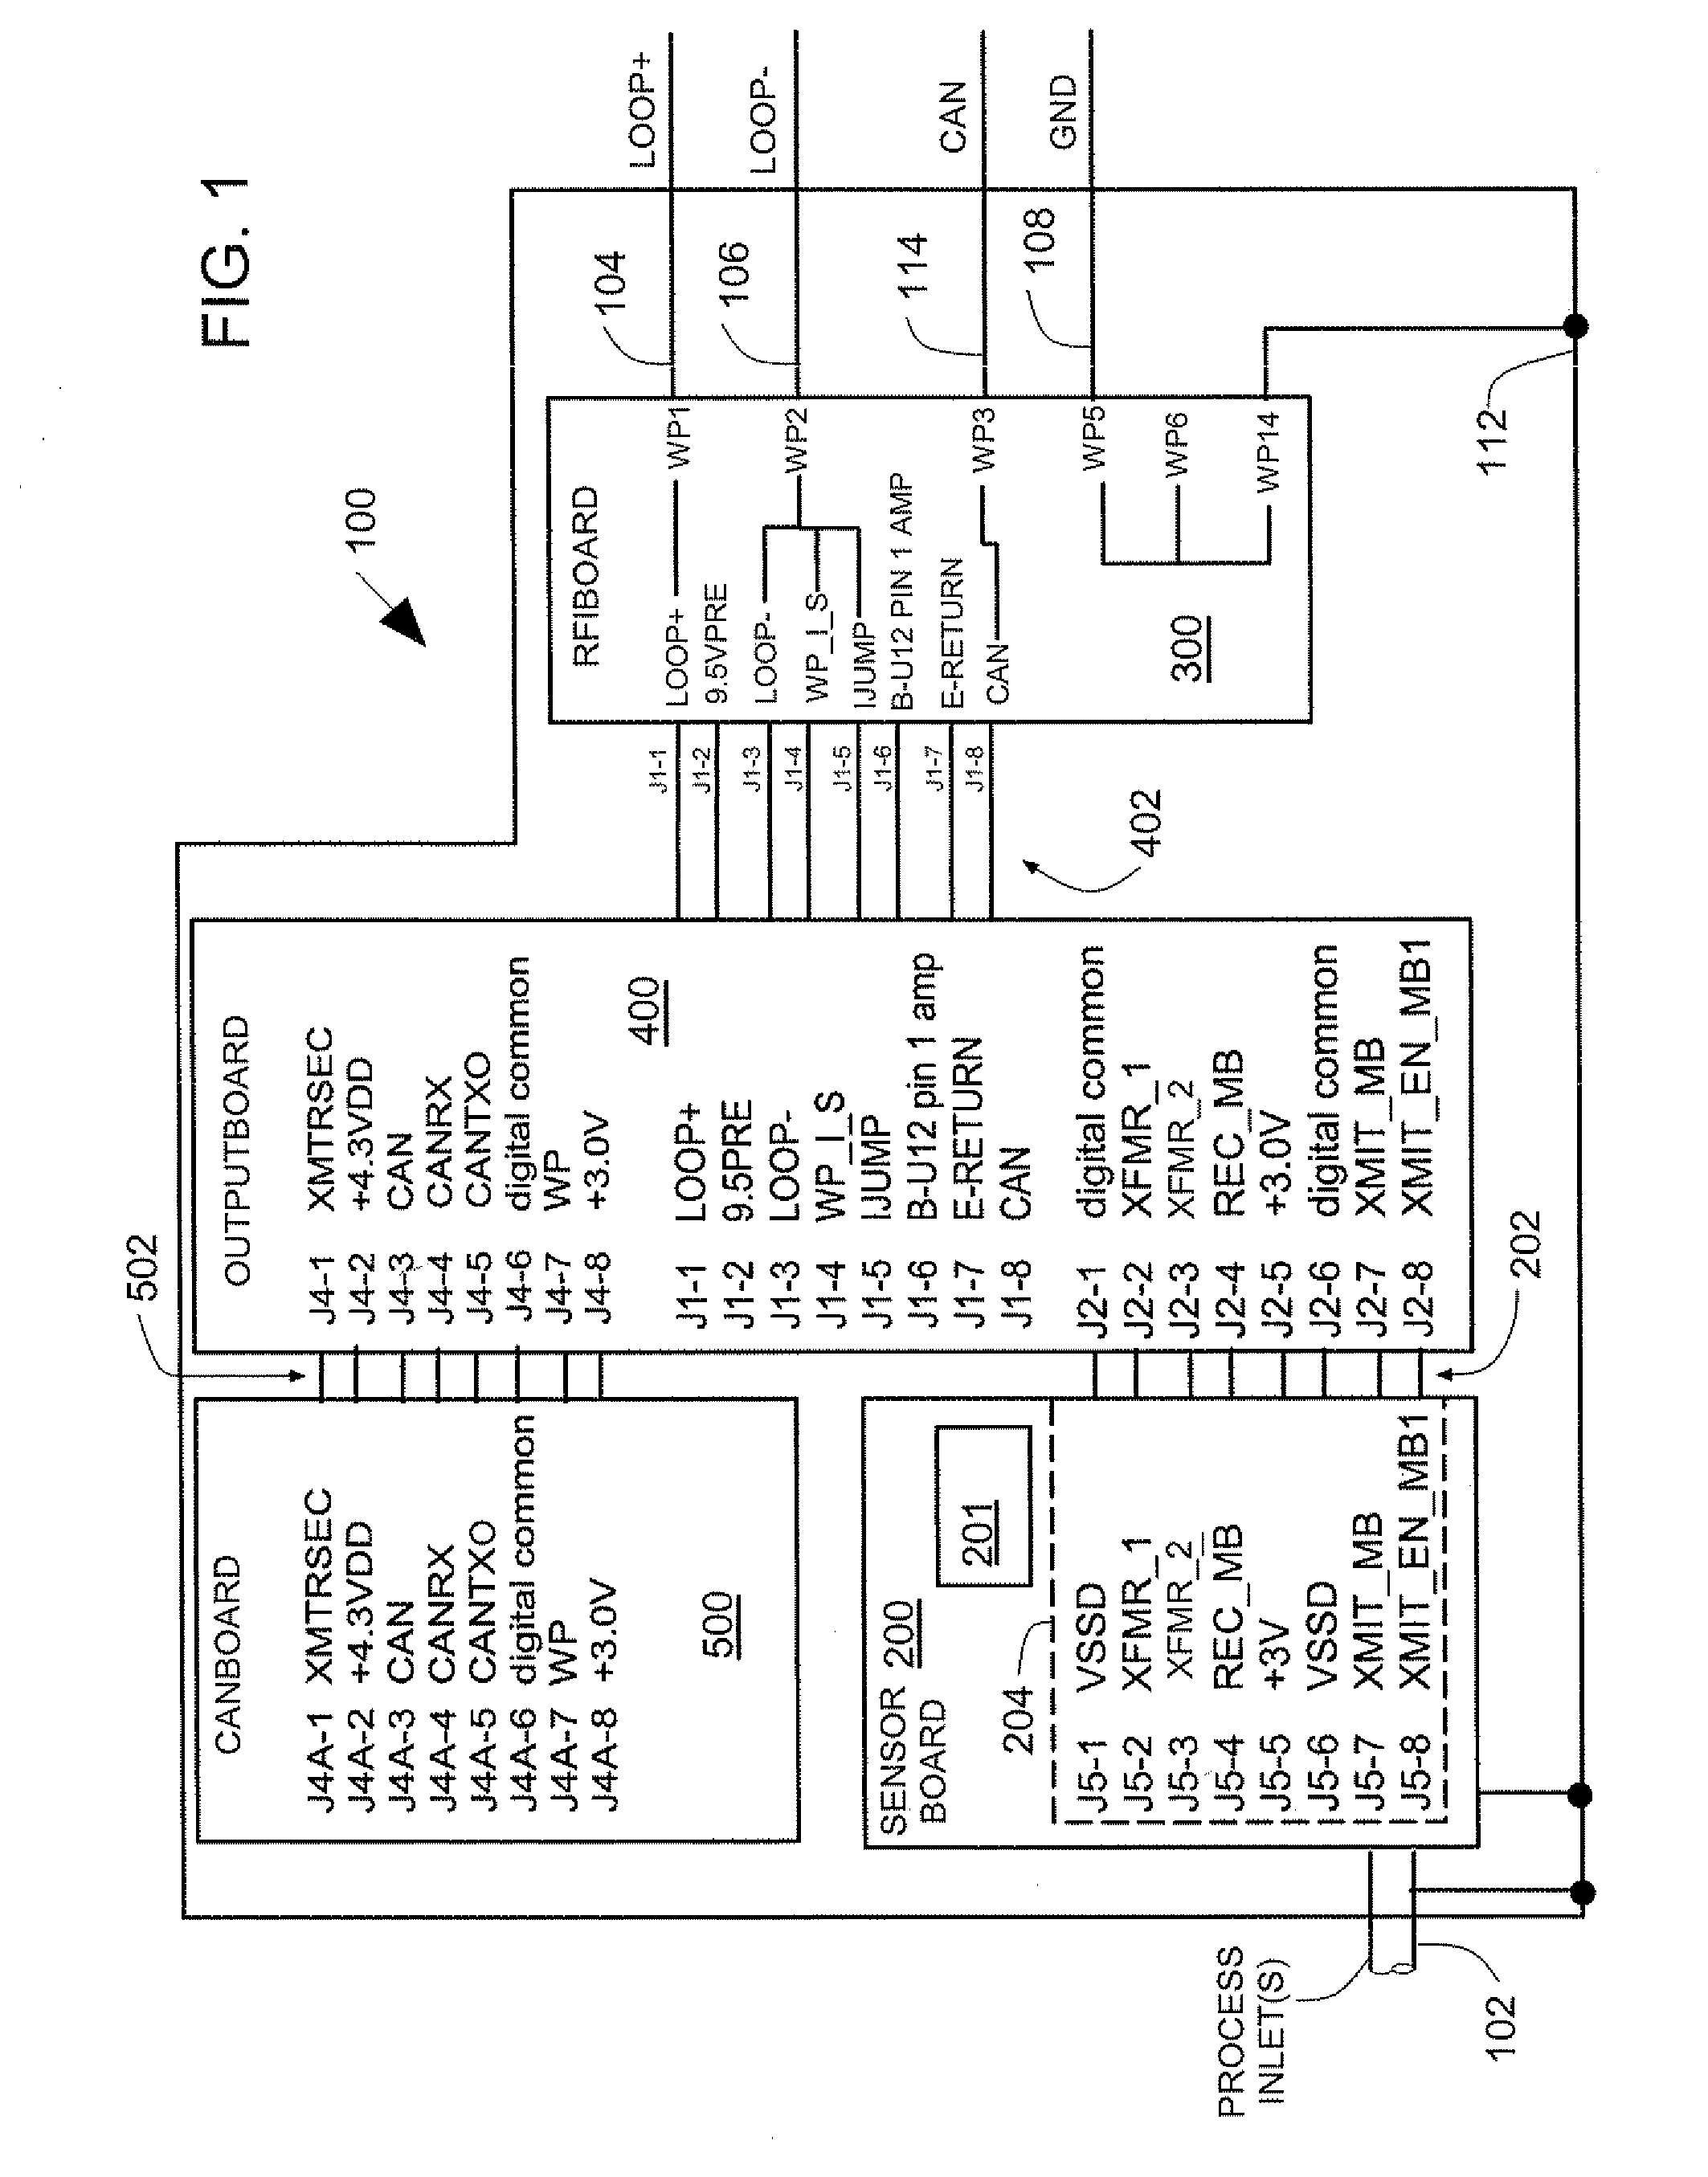 Two wire transmitter with isolated can output